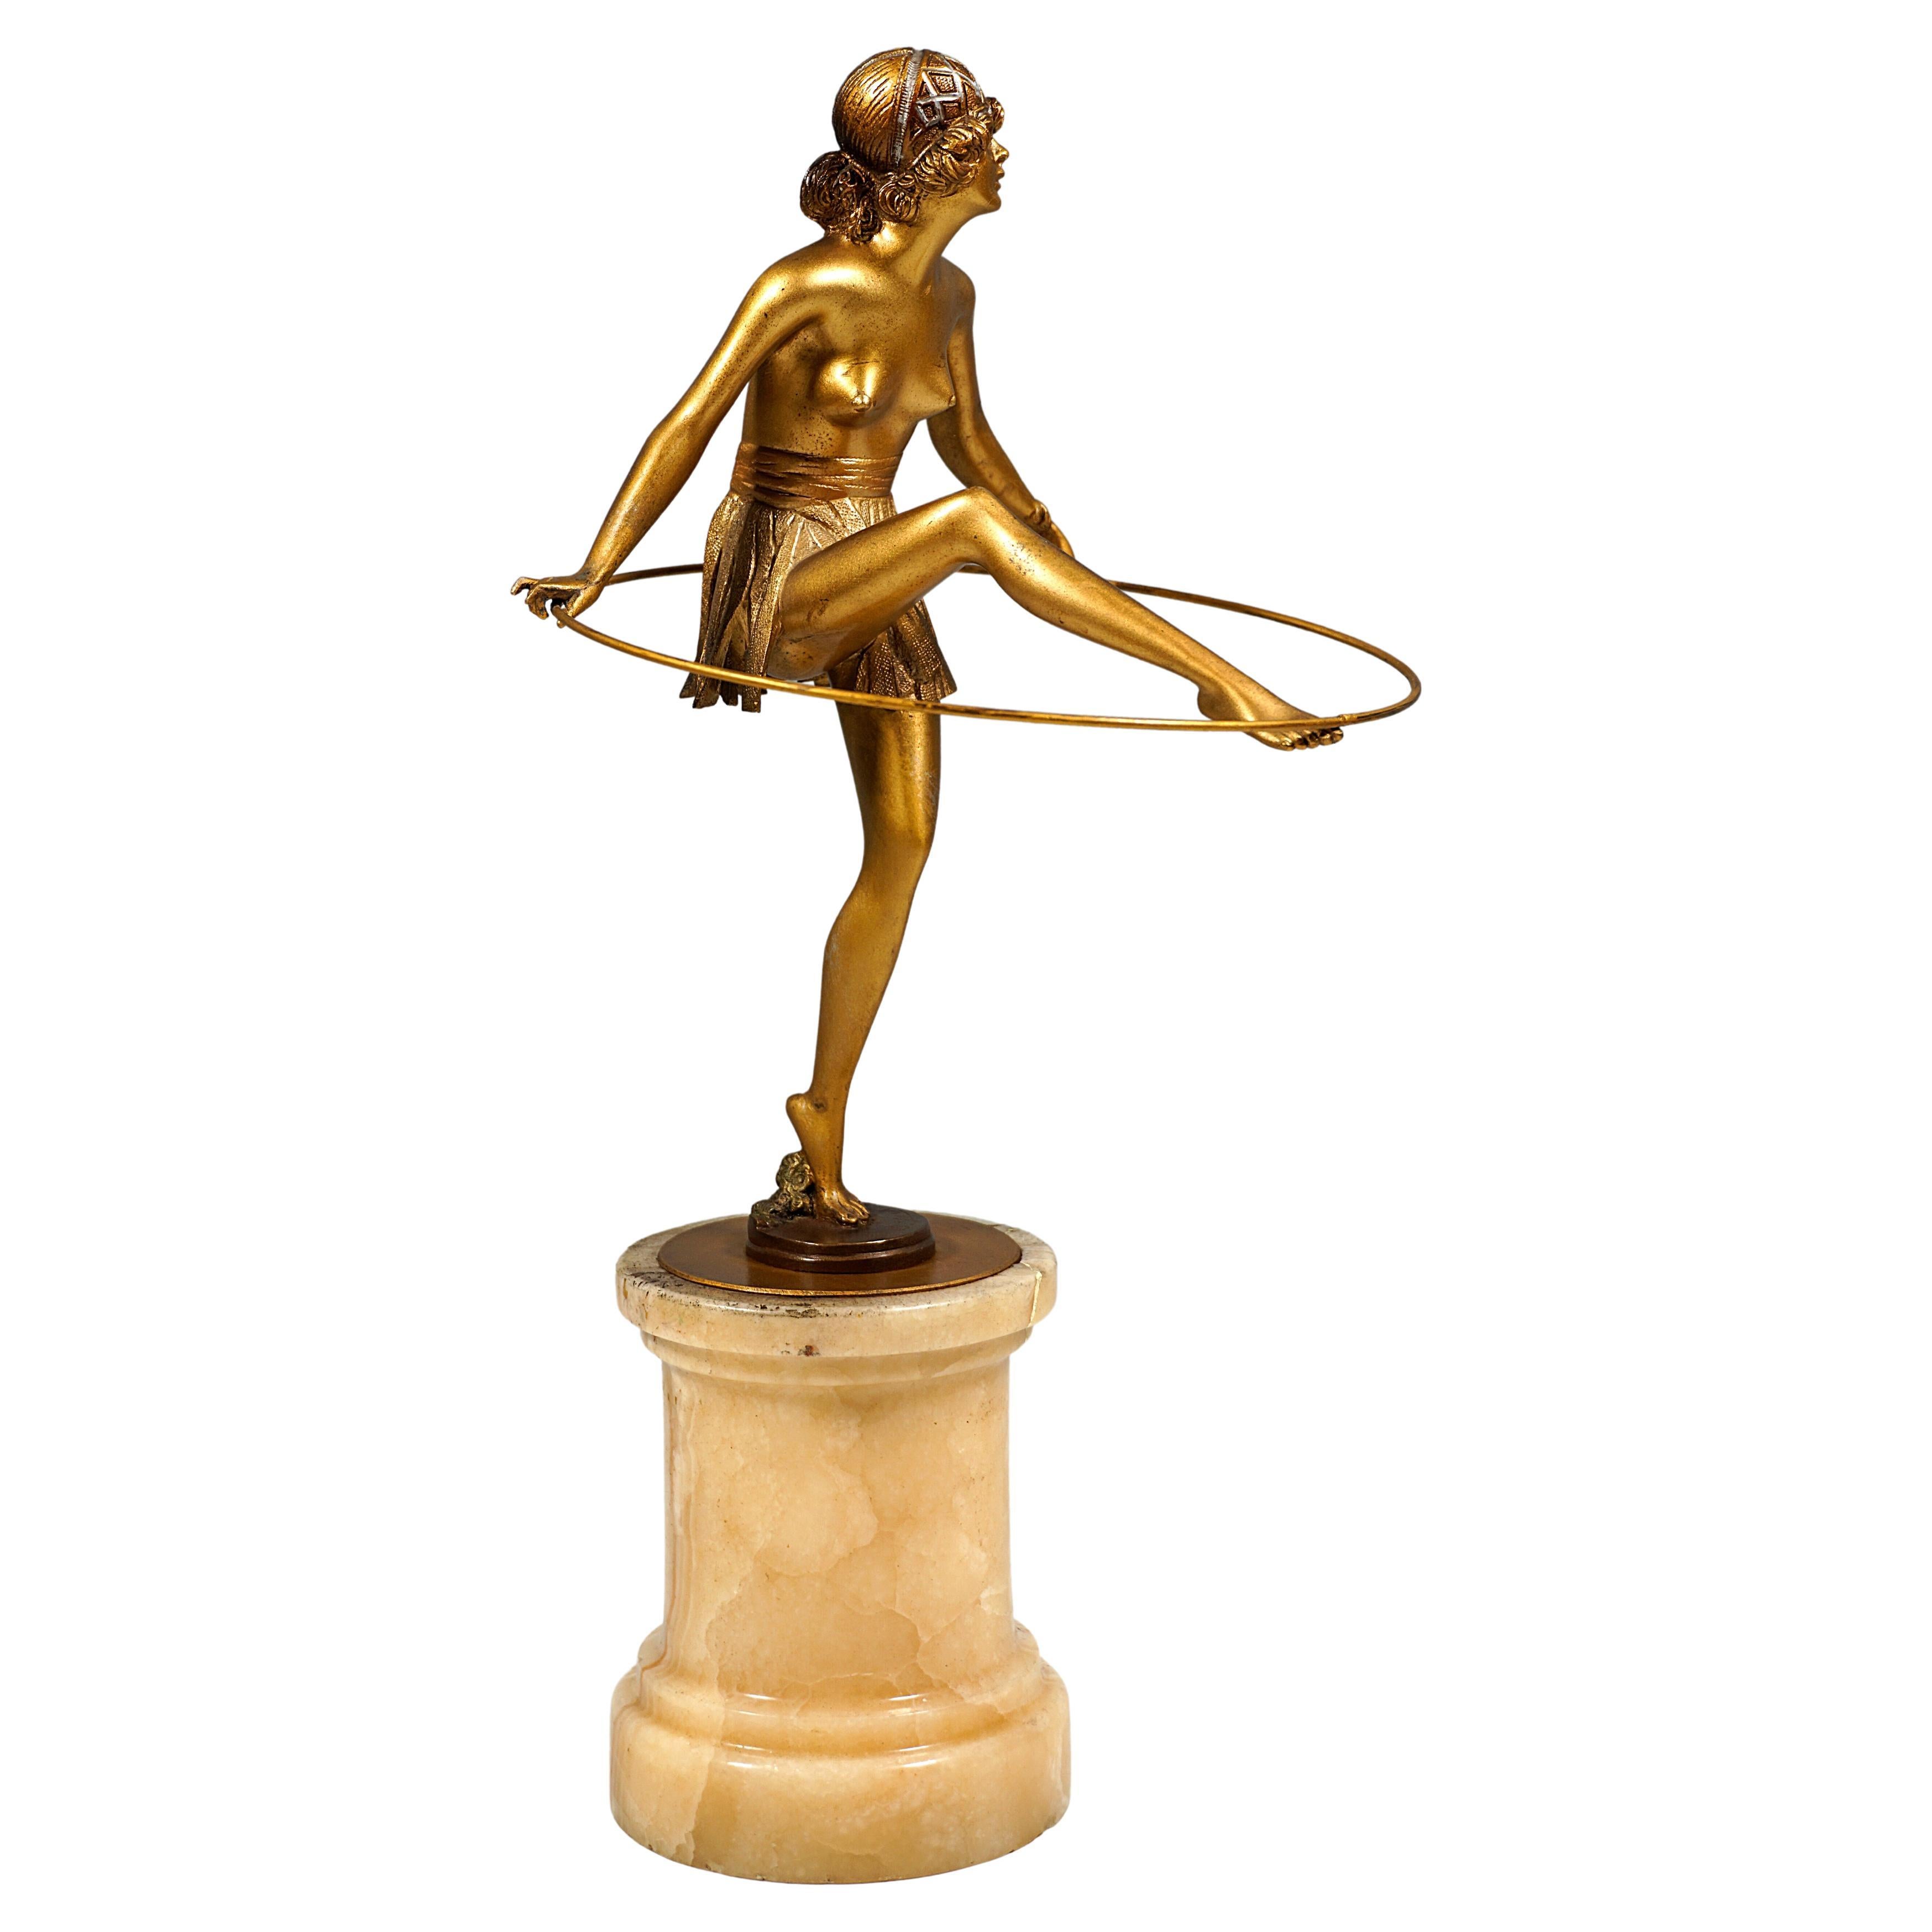 Interesting Vienna bronze figurine: Semi-nude lady holding a hoop
 
It is a finest figurine. The bare-breasted lady stands on round flat bronze base which is attached to column made of brownish-white marble. The female nude holds a hoop in both